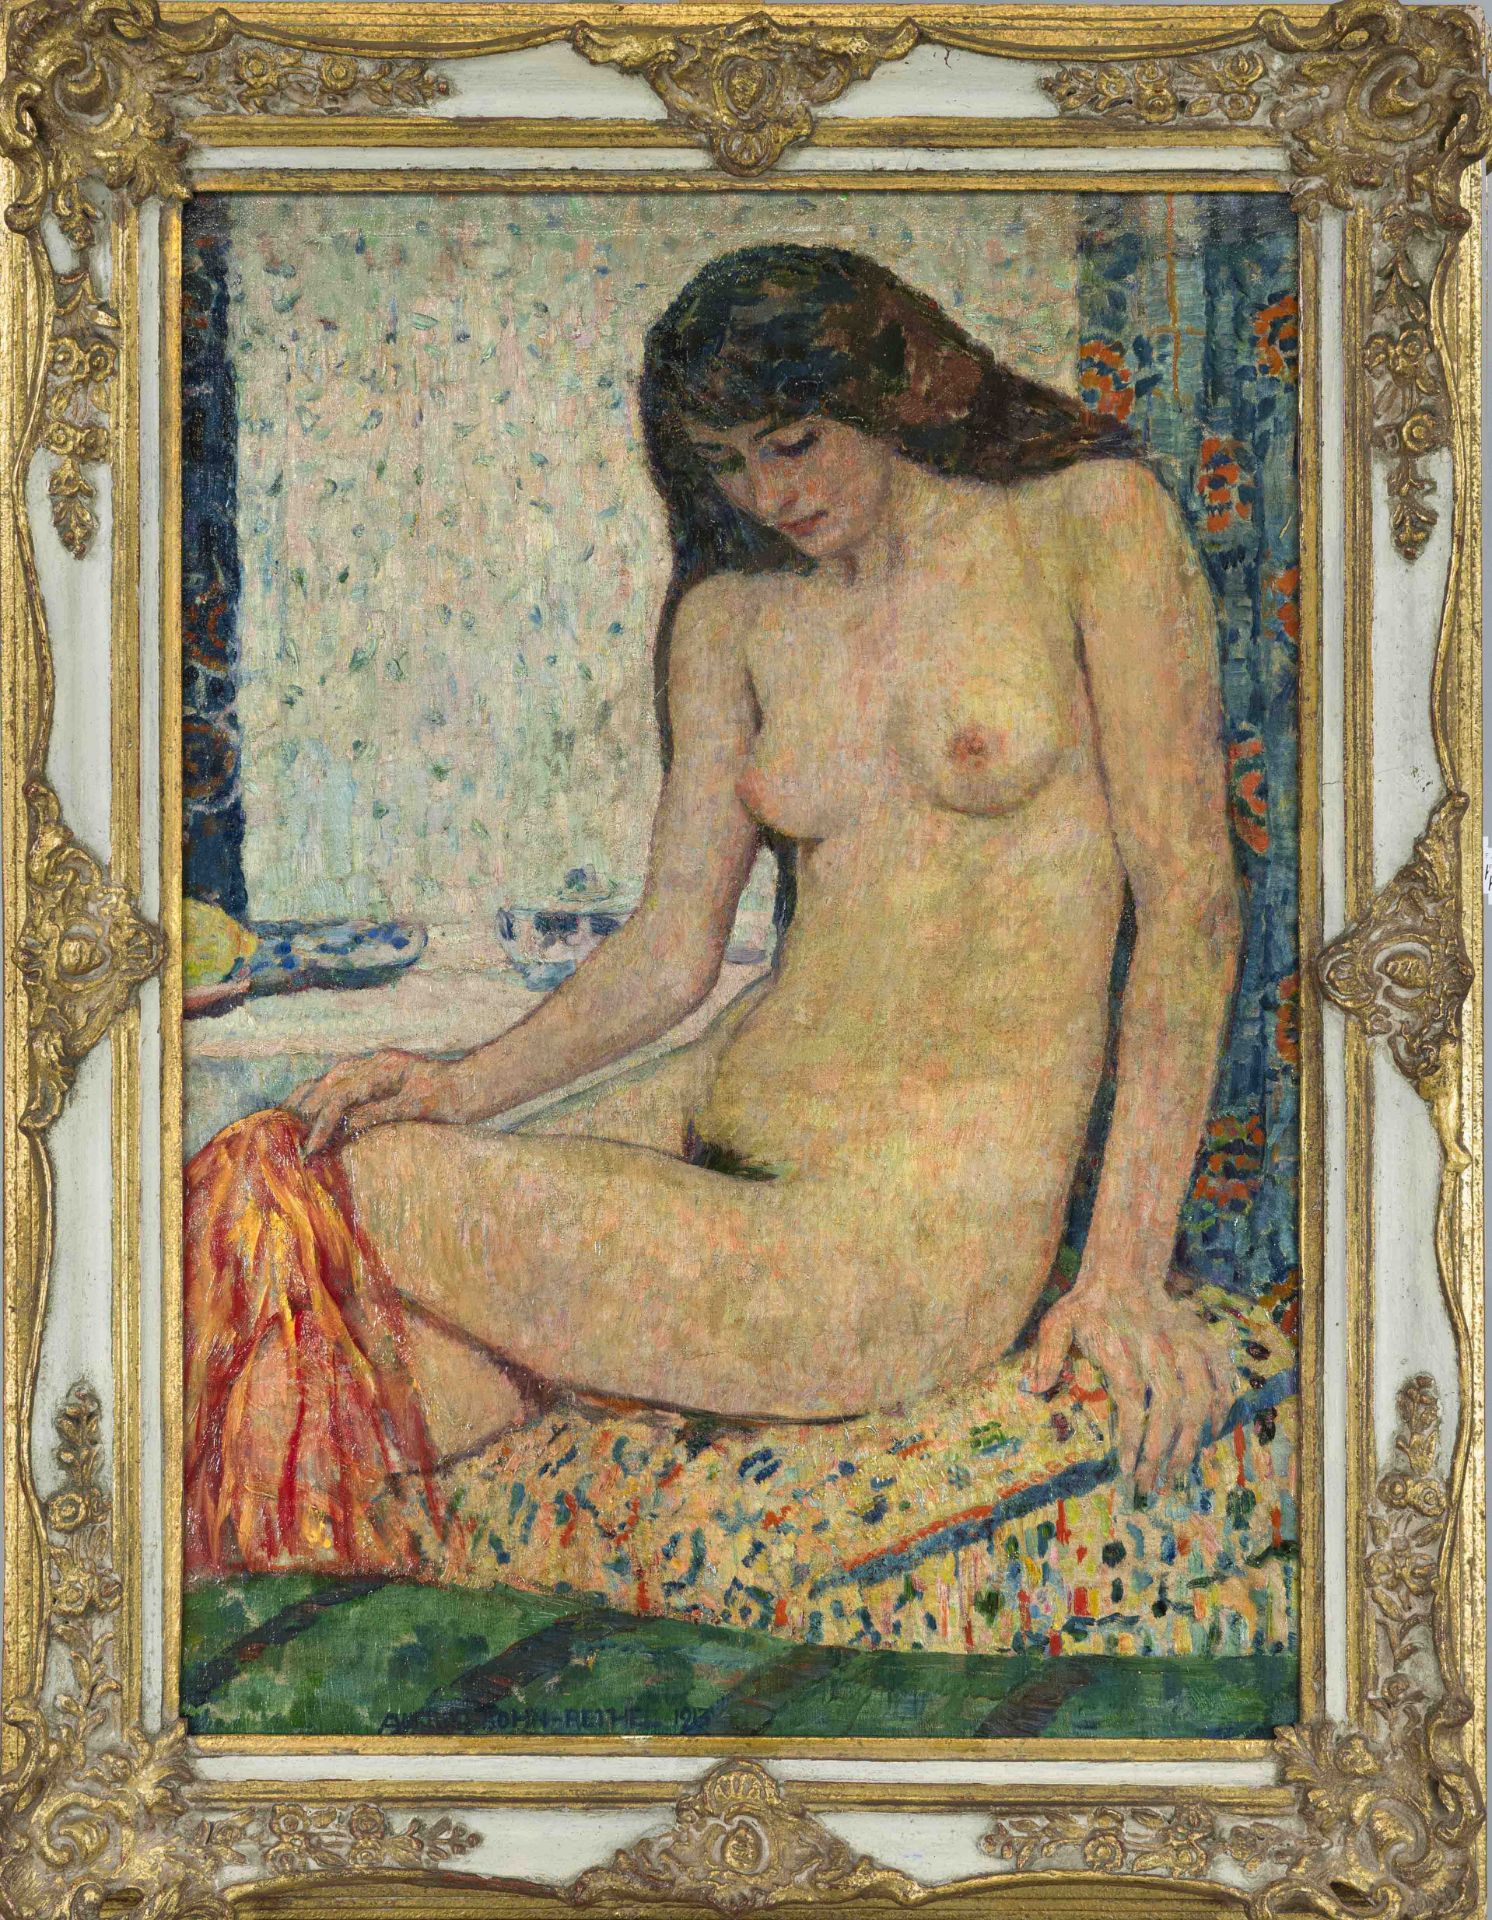 Alfred Sohn-Rethel (1875-1955), large female nude in the spirit of classical modernism, oil on